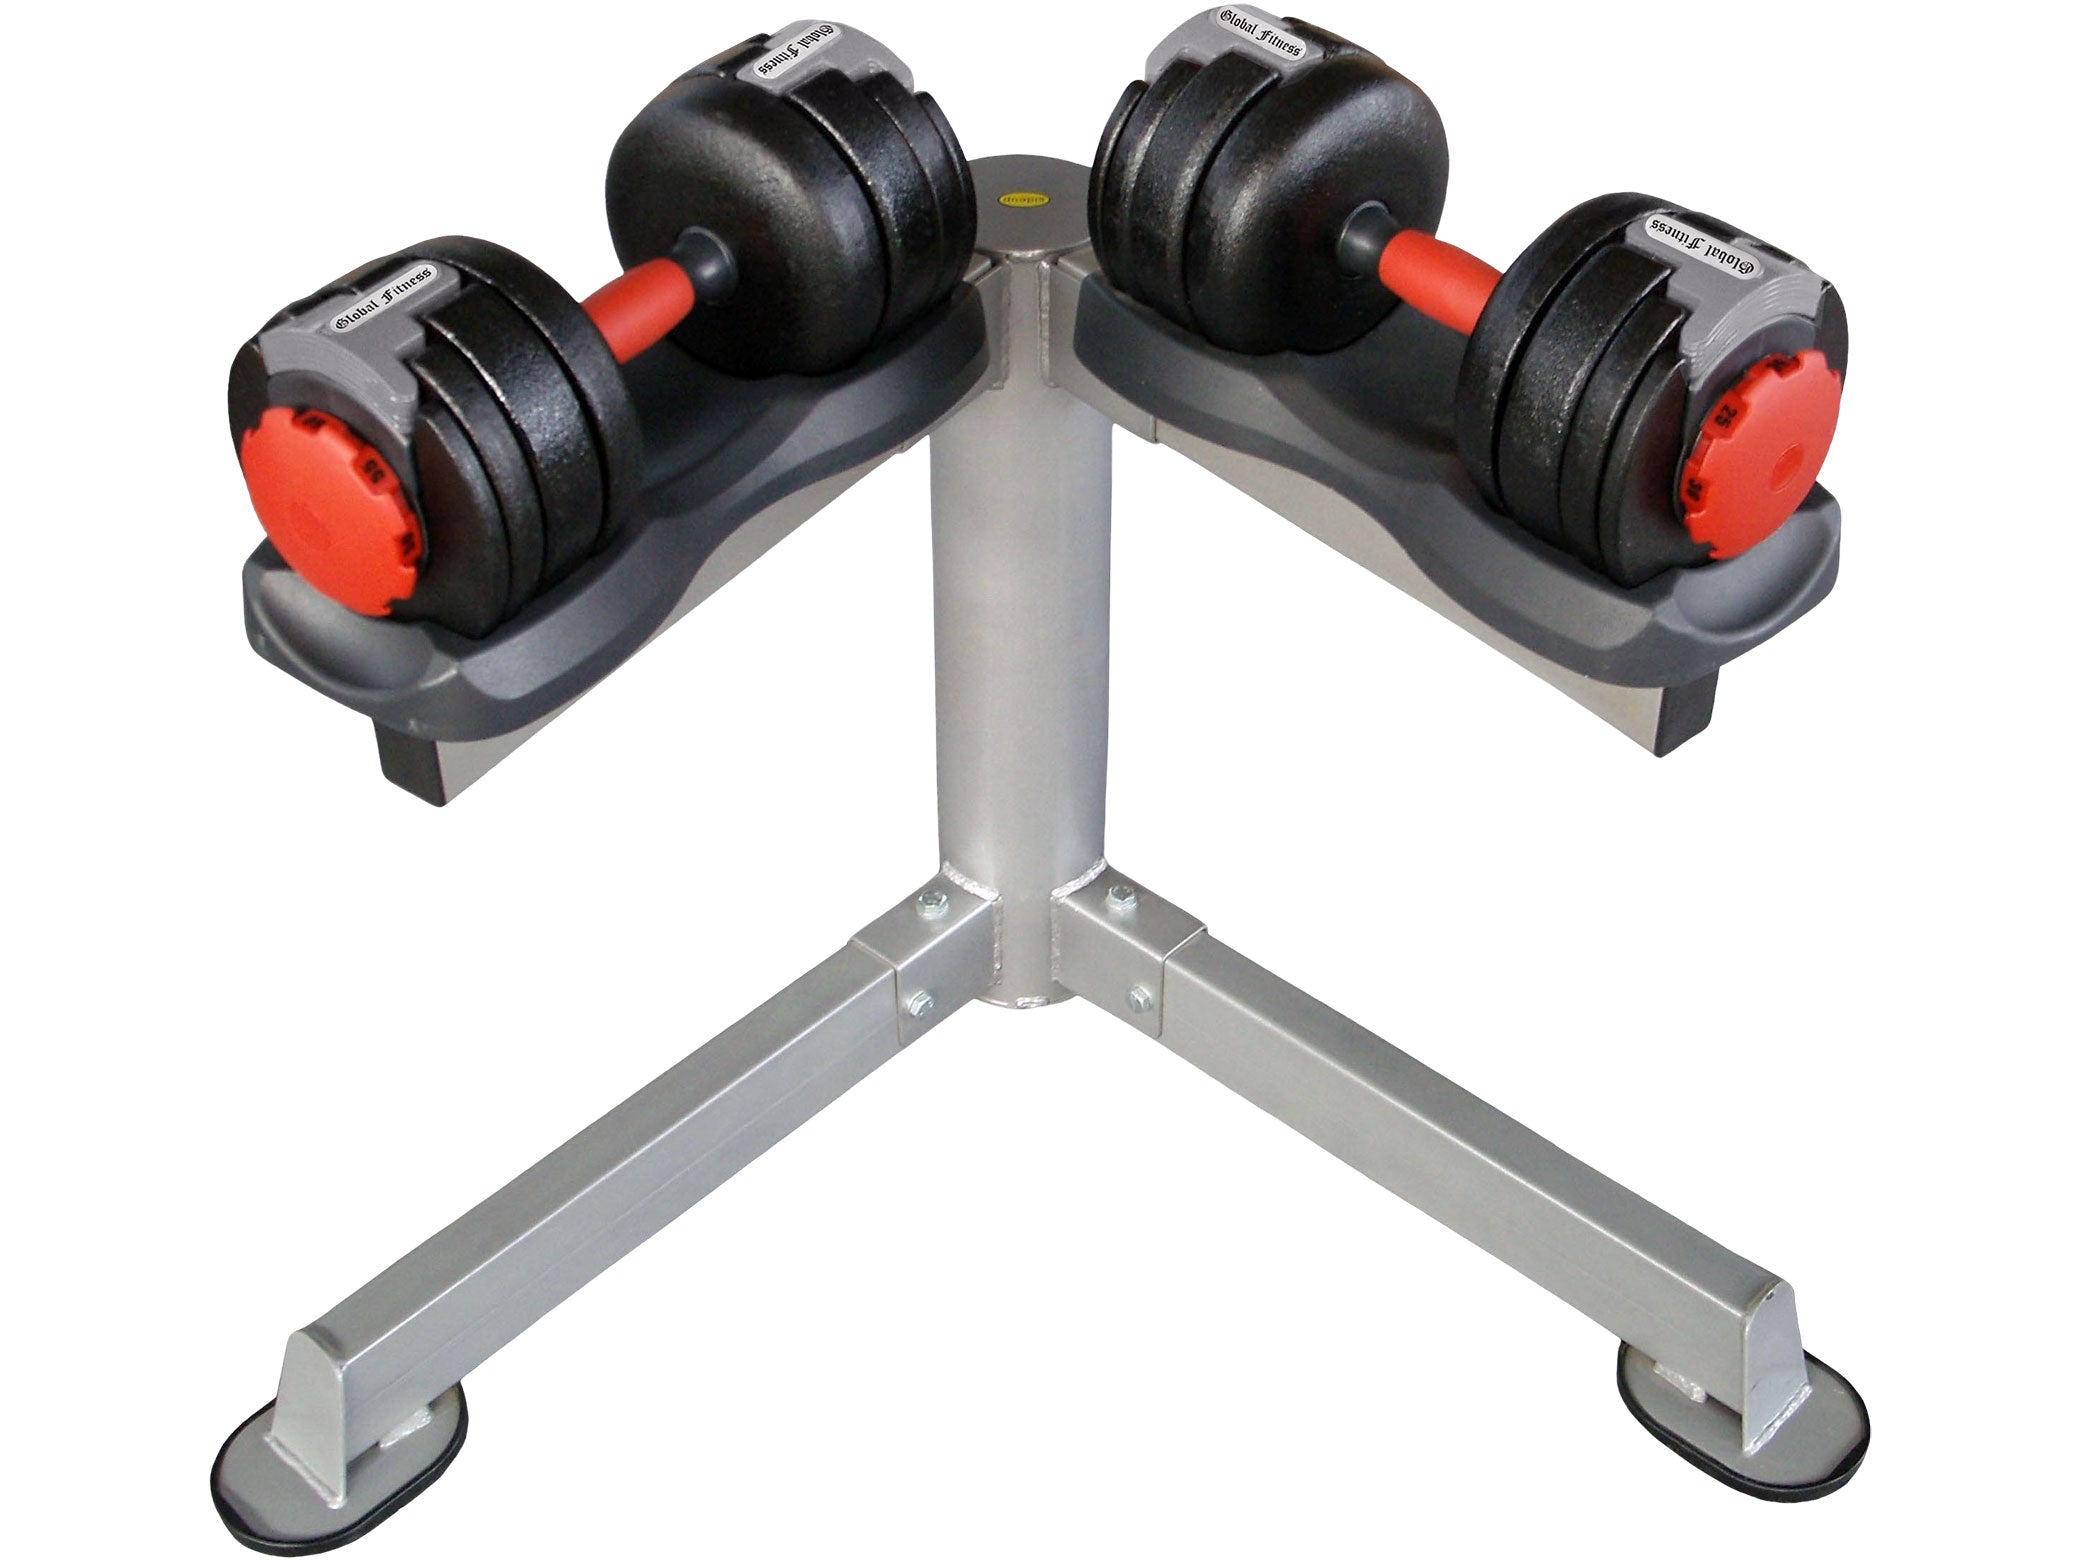 New Global Fitness 60lb Adjustable Dumbbell Pair with Stand.